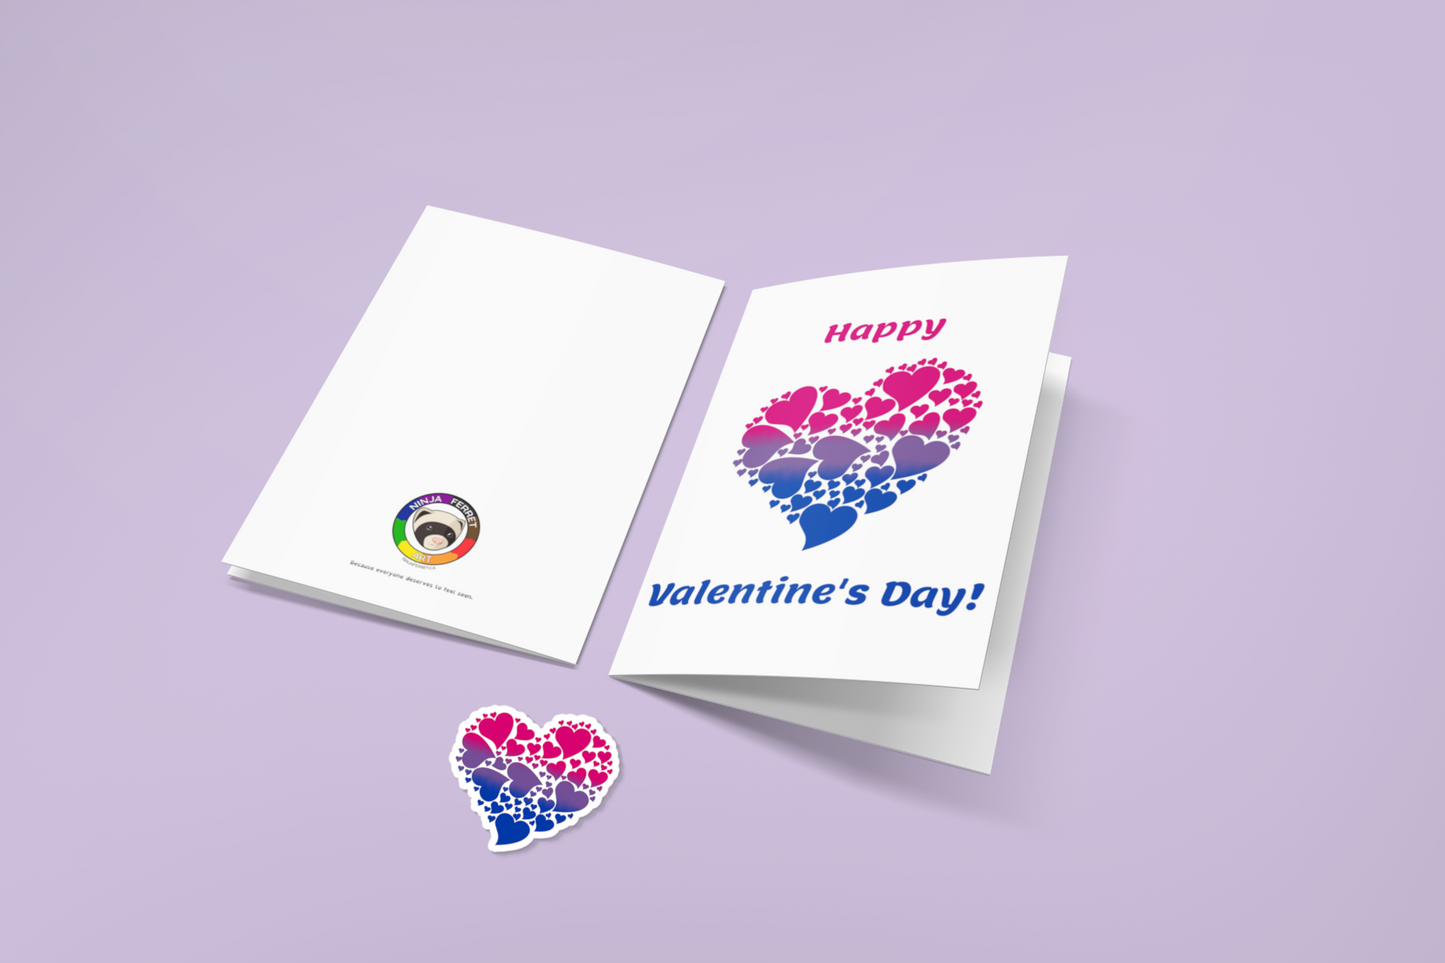 Mock up of two greeting cards, one showing the back (with the Ninja Ferret logo), and the other showing text: Happy Valentine's Day! and a heart made up of smaller hearts, coloured with a gradient of the bisexual flag. A sticker that matches the heart is also shown.